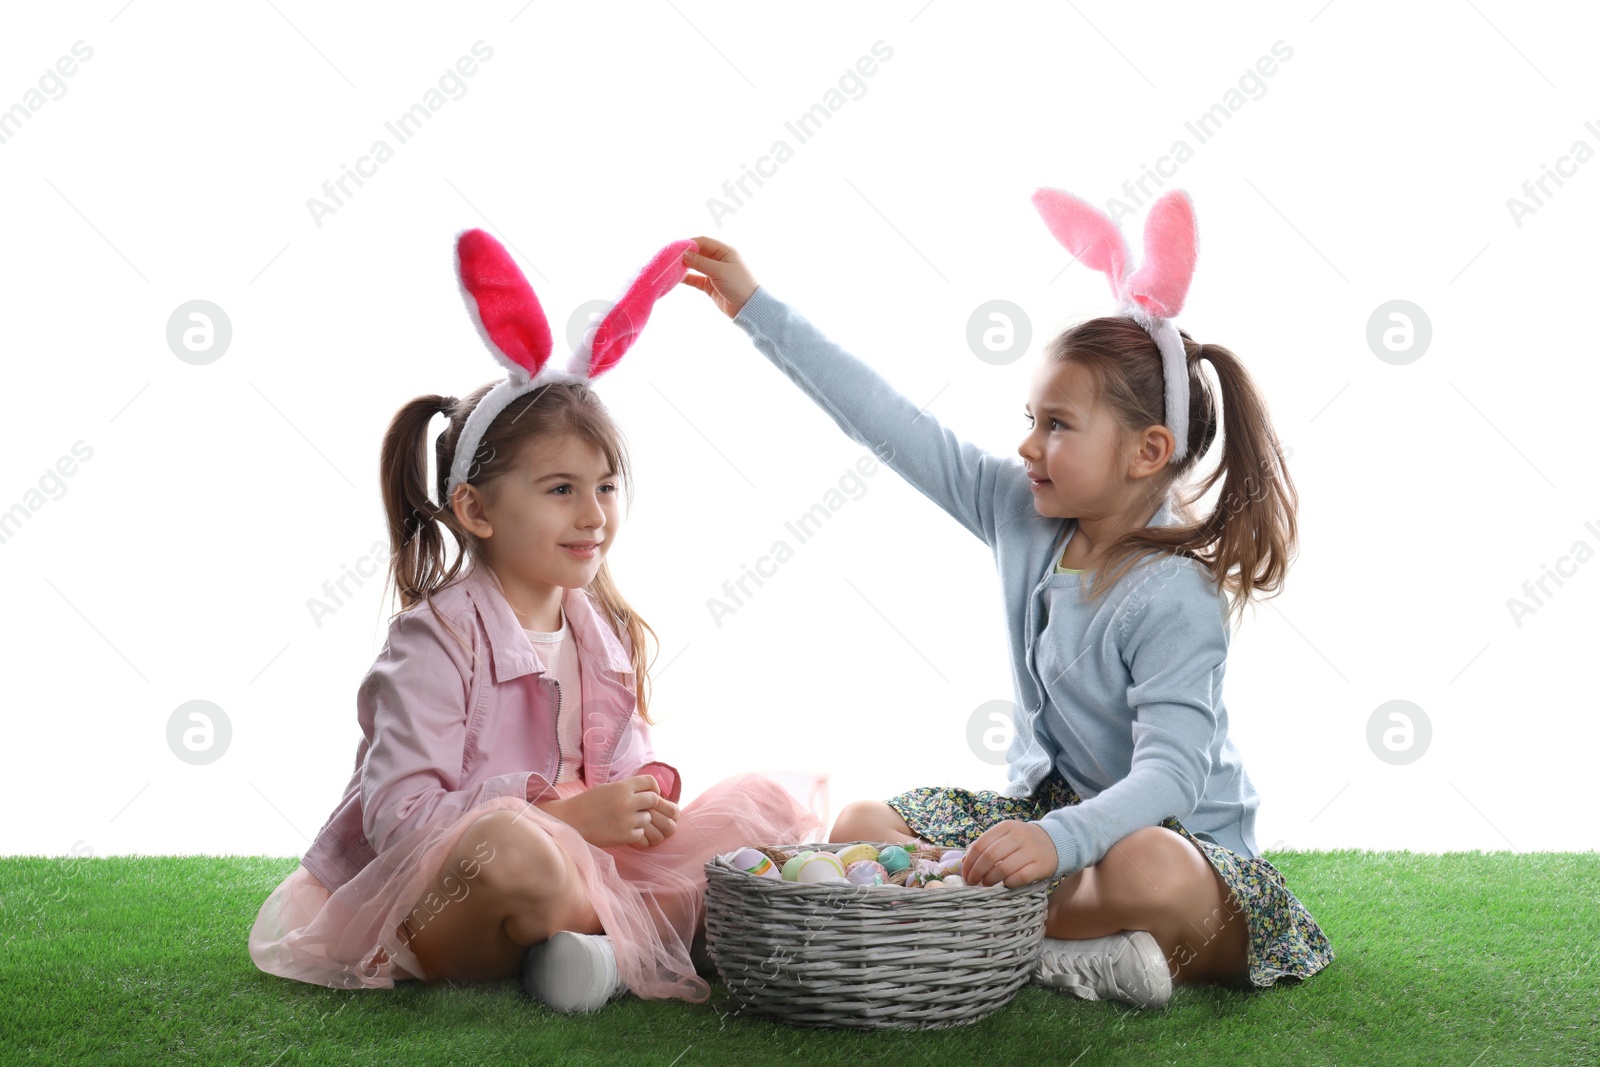 Photo of Adorable little girls with bunny ears and wicker basket full of Easter eggs on green grass against white background